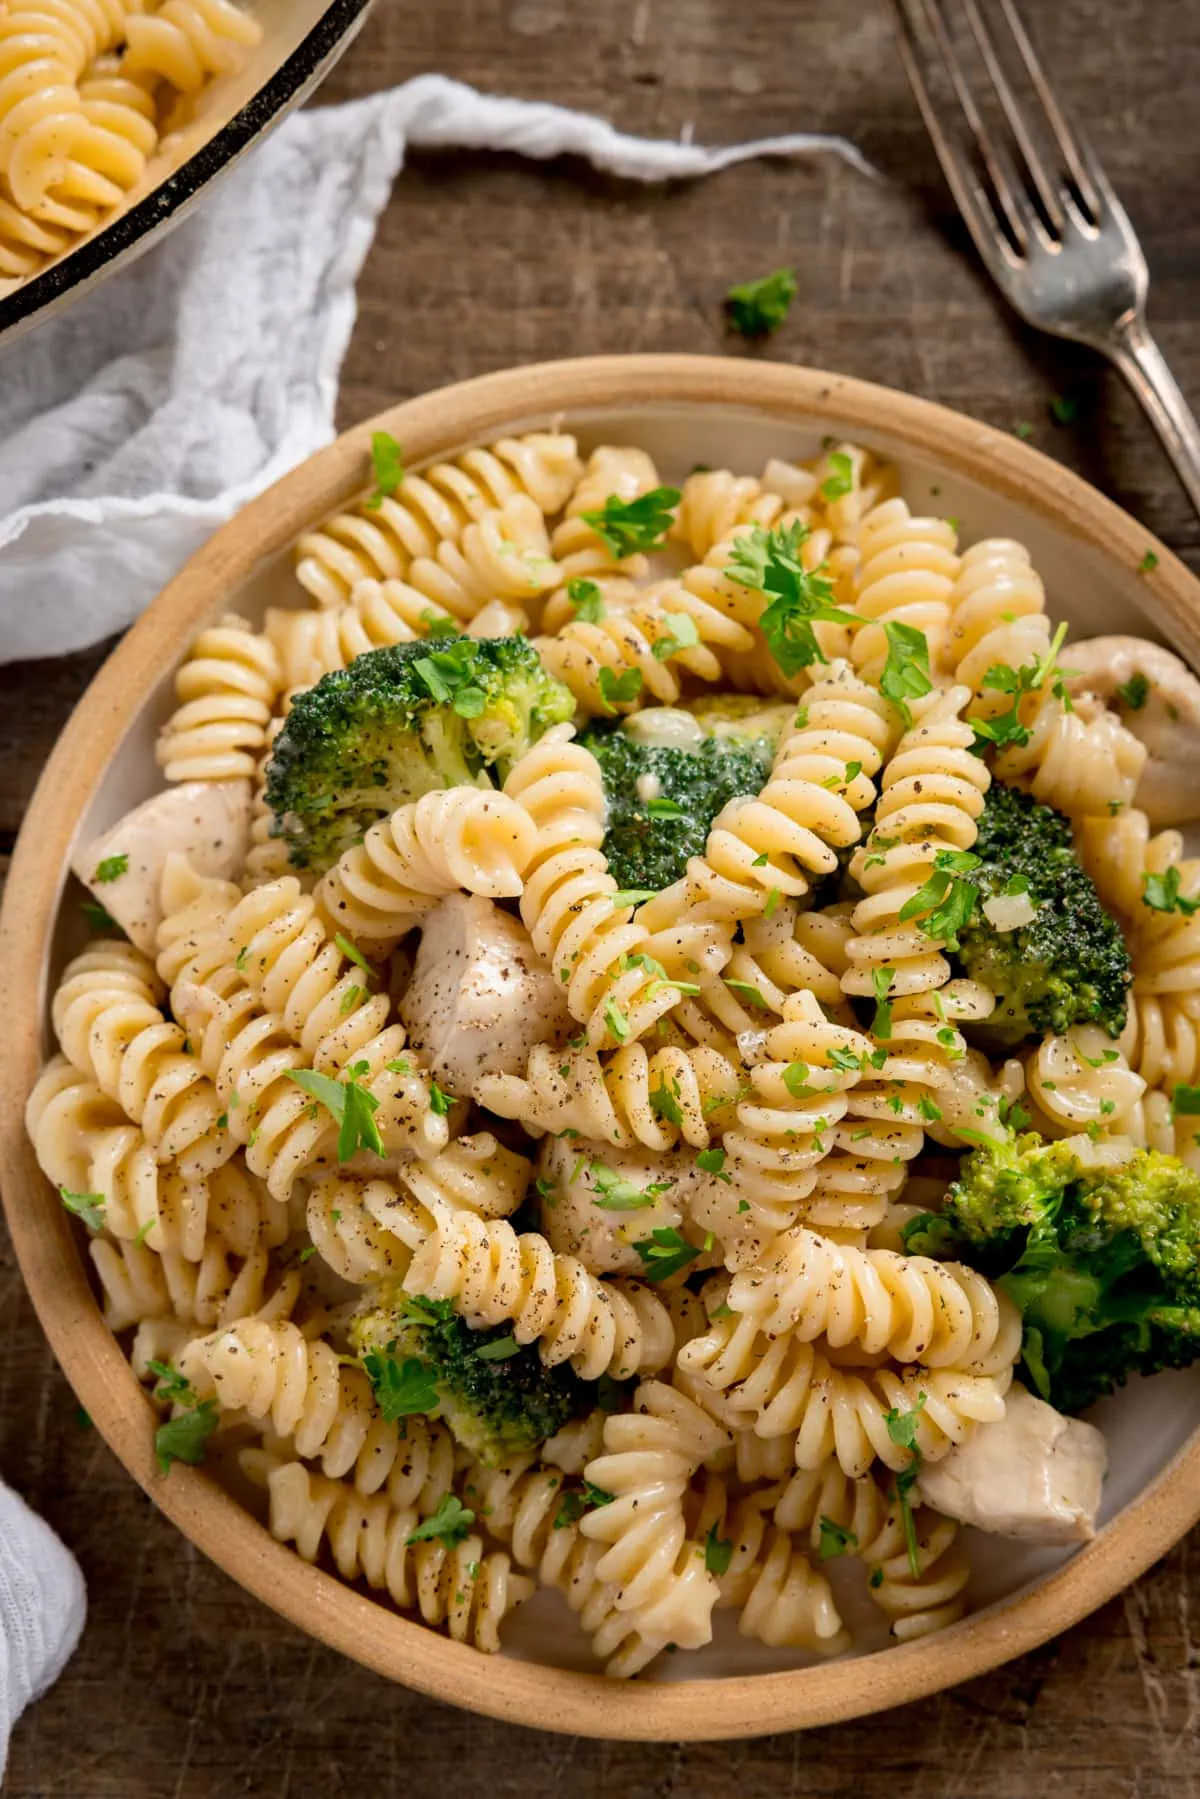 Overhead shot of chicken and broccoli pasta on a white plate with stone rim. The plate is on a wooden table with a white napkin and fork nearby.